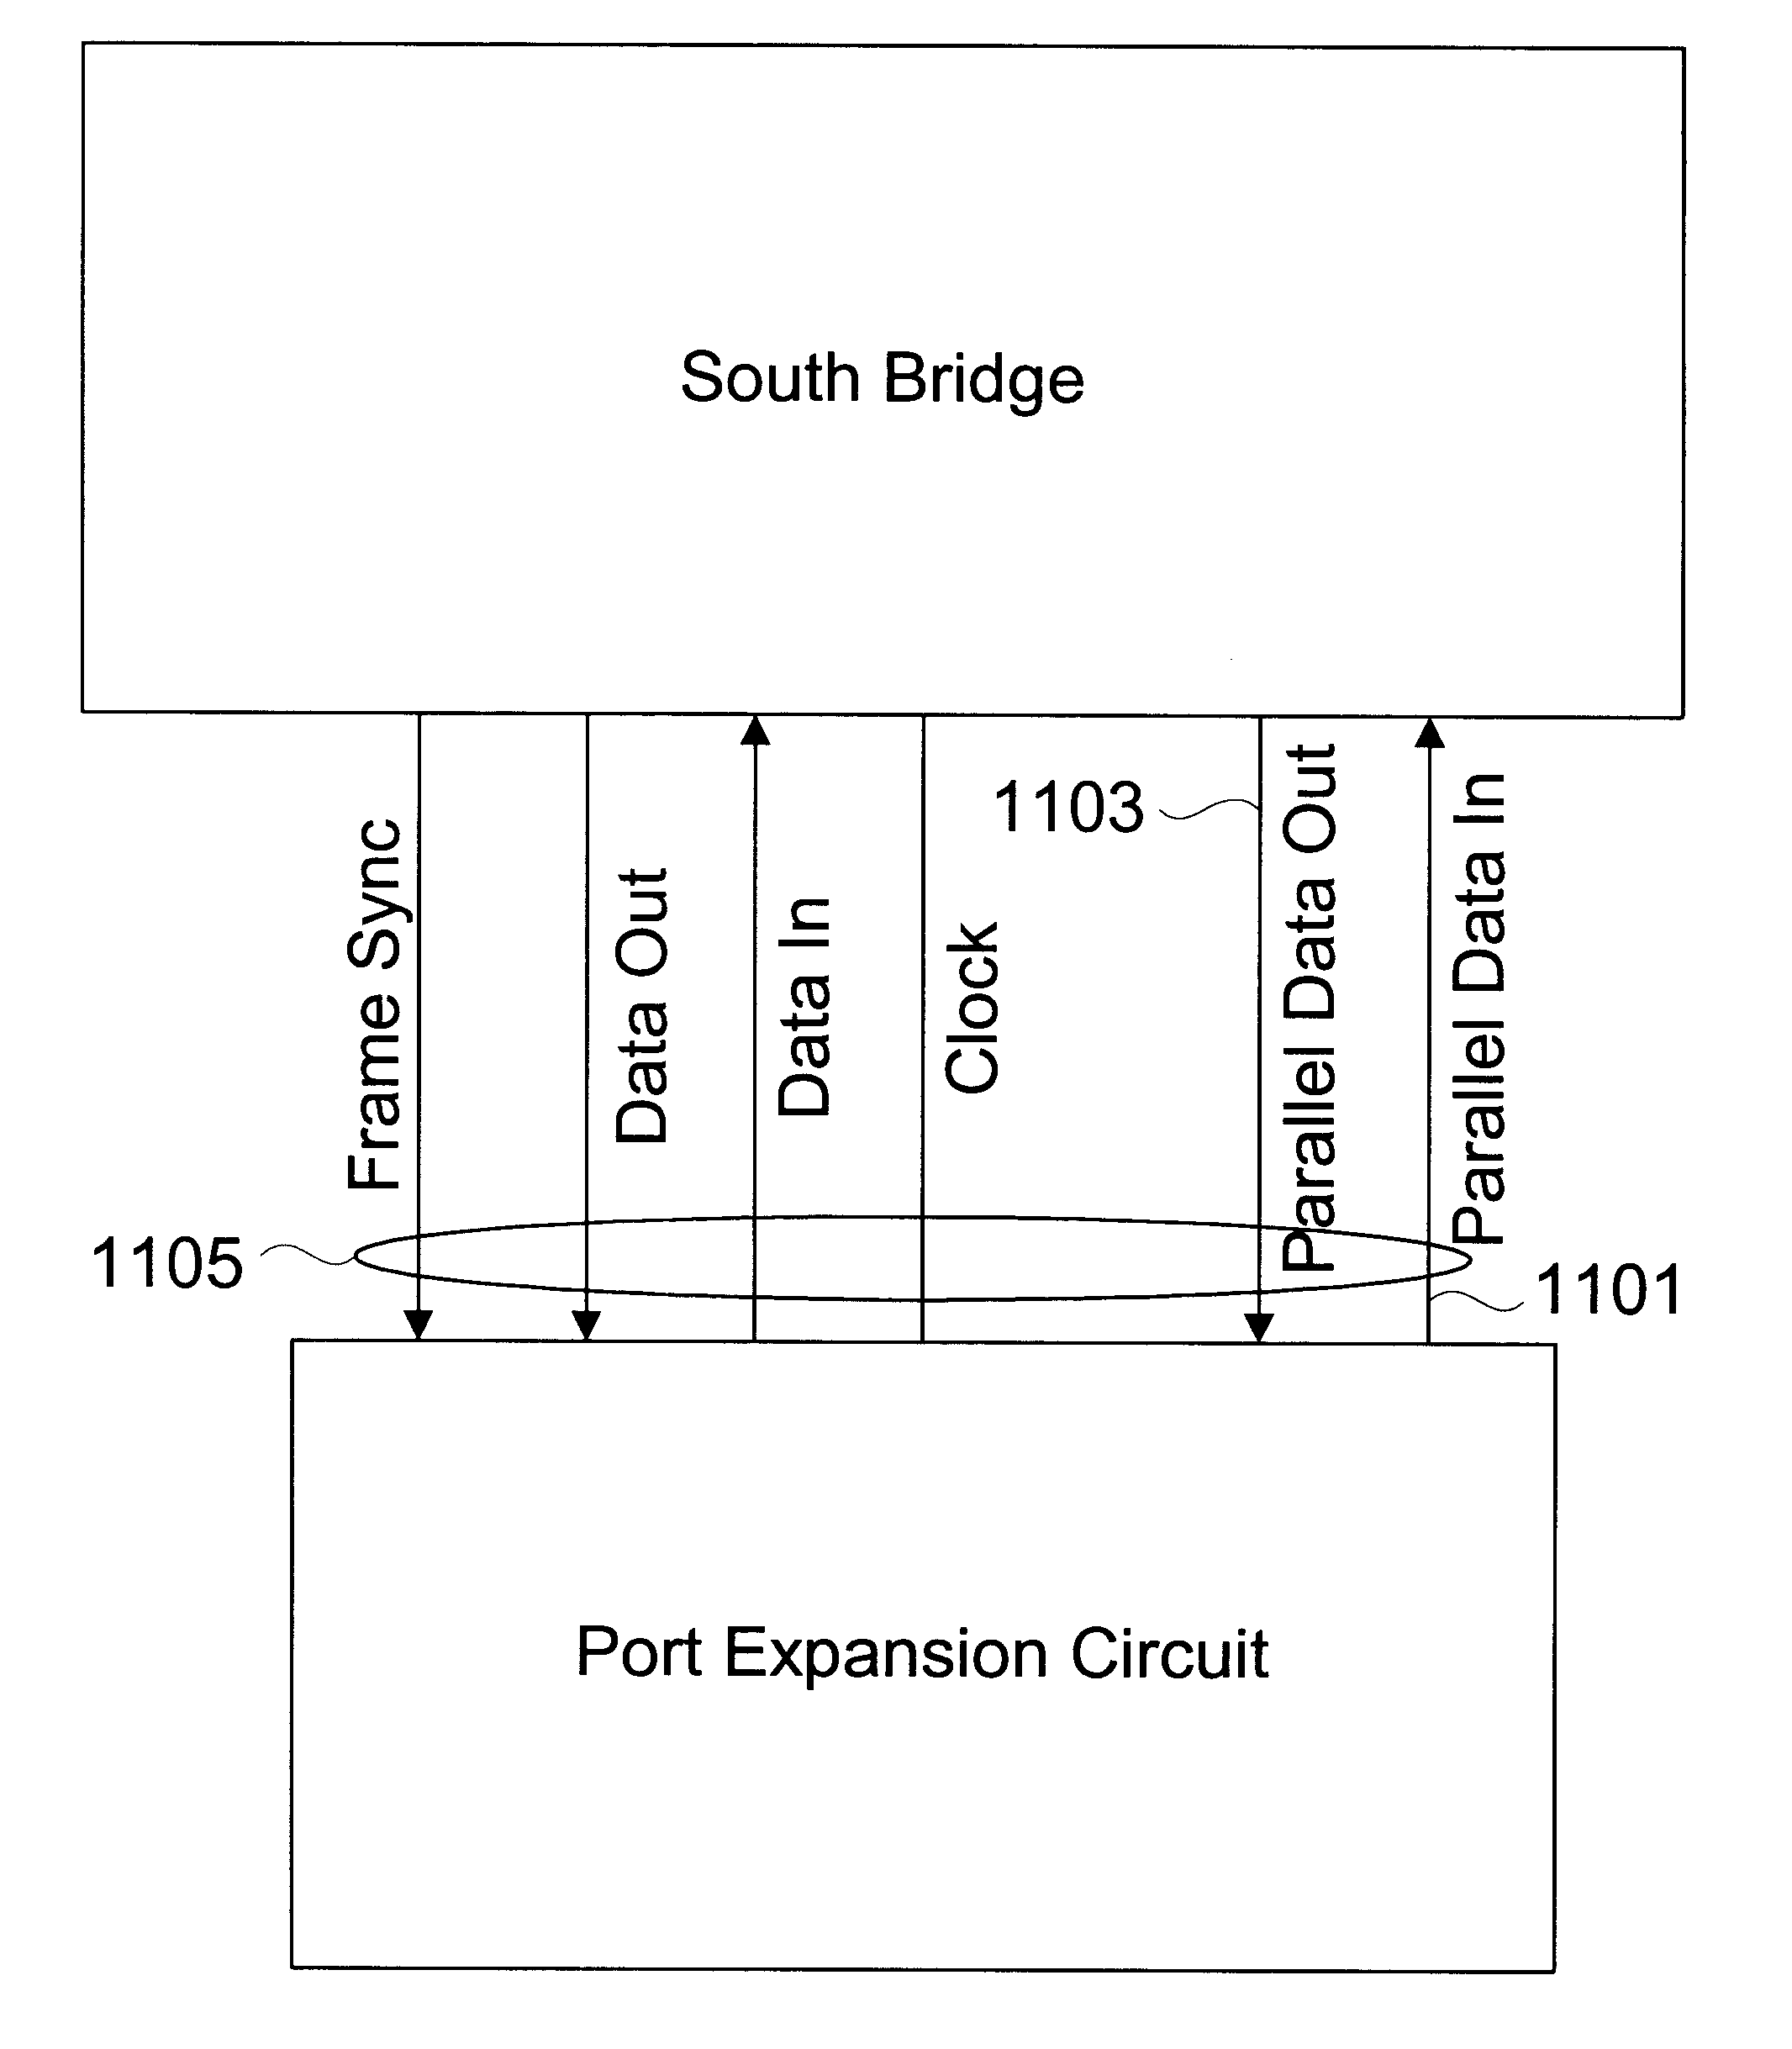 PC parallel port structure partitioned between two integrated circuits interconnected by a serial bus